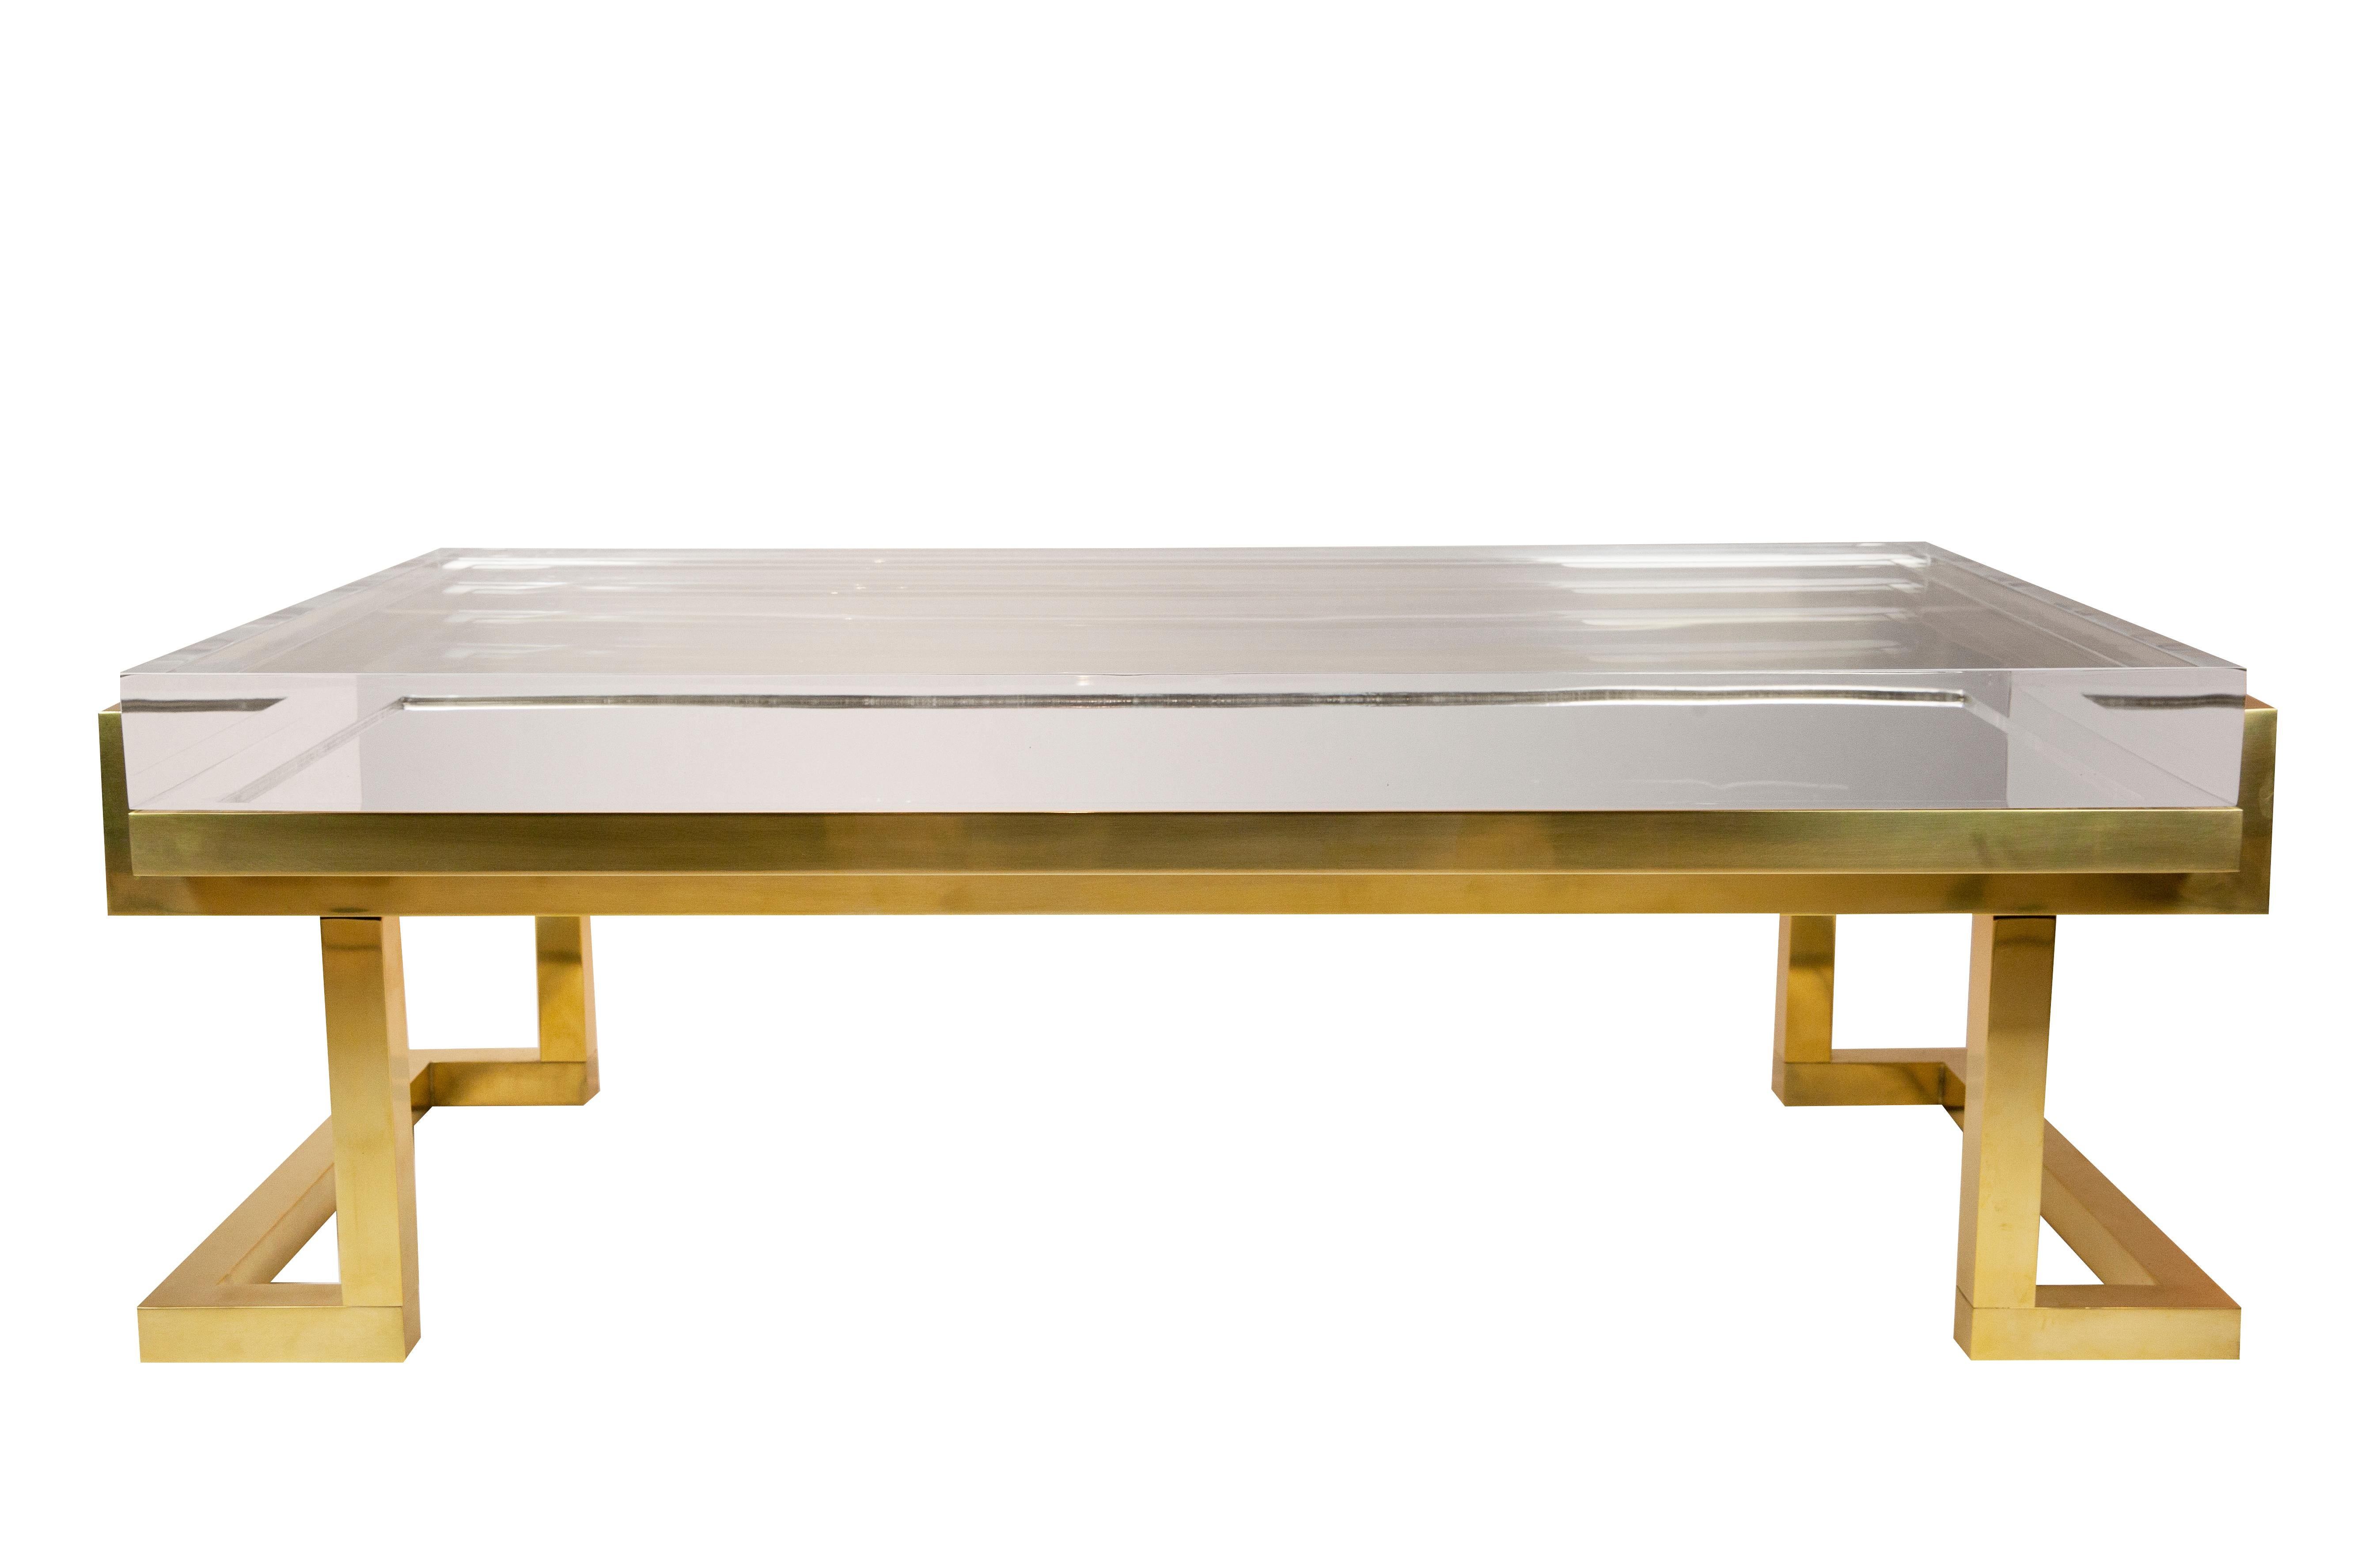 Discover the Mies Coffee Table. Custom Sizes Available. Pristine Acrylic or New Cerused White Oak combined with Opulent Metal Finishes. Custom lengths up to 7' and depths up to 5' available. Visit our Rounded Coffee table version !